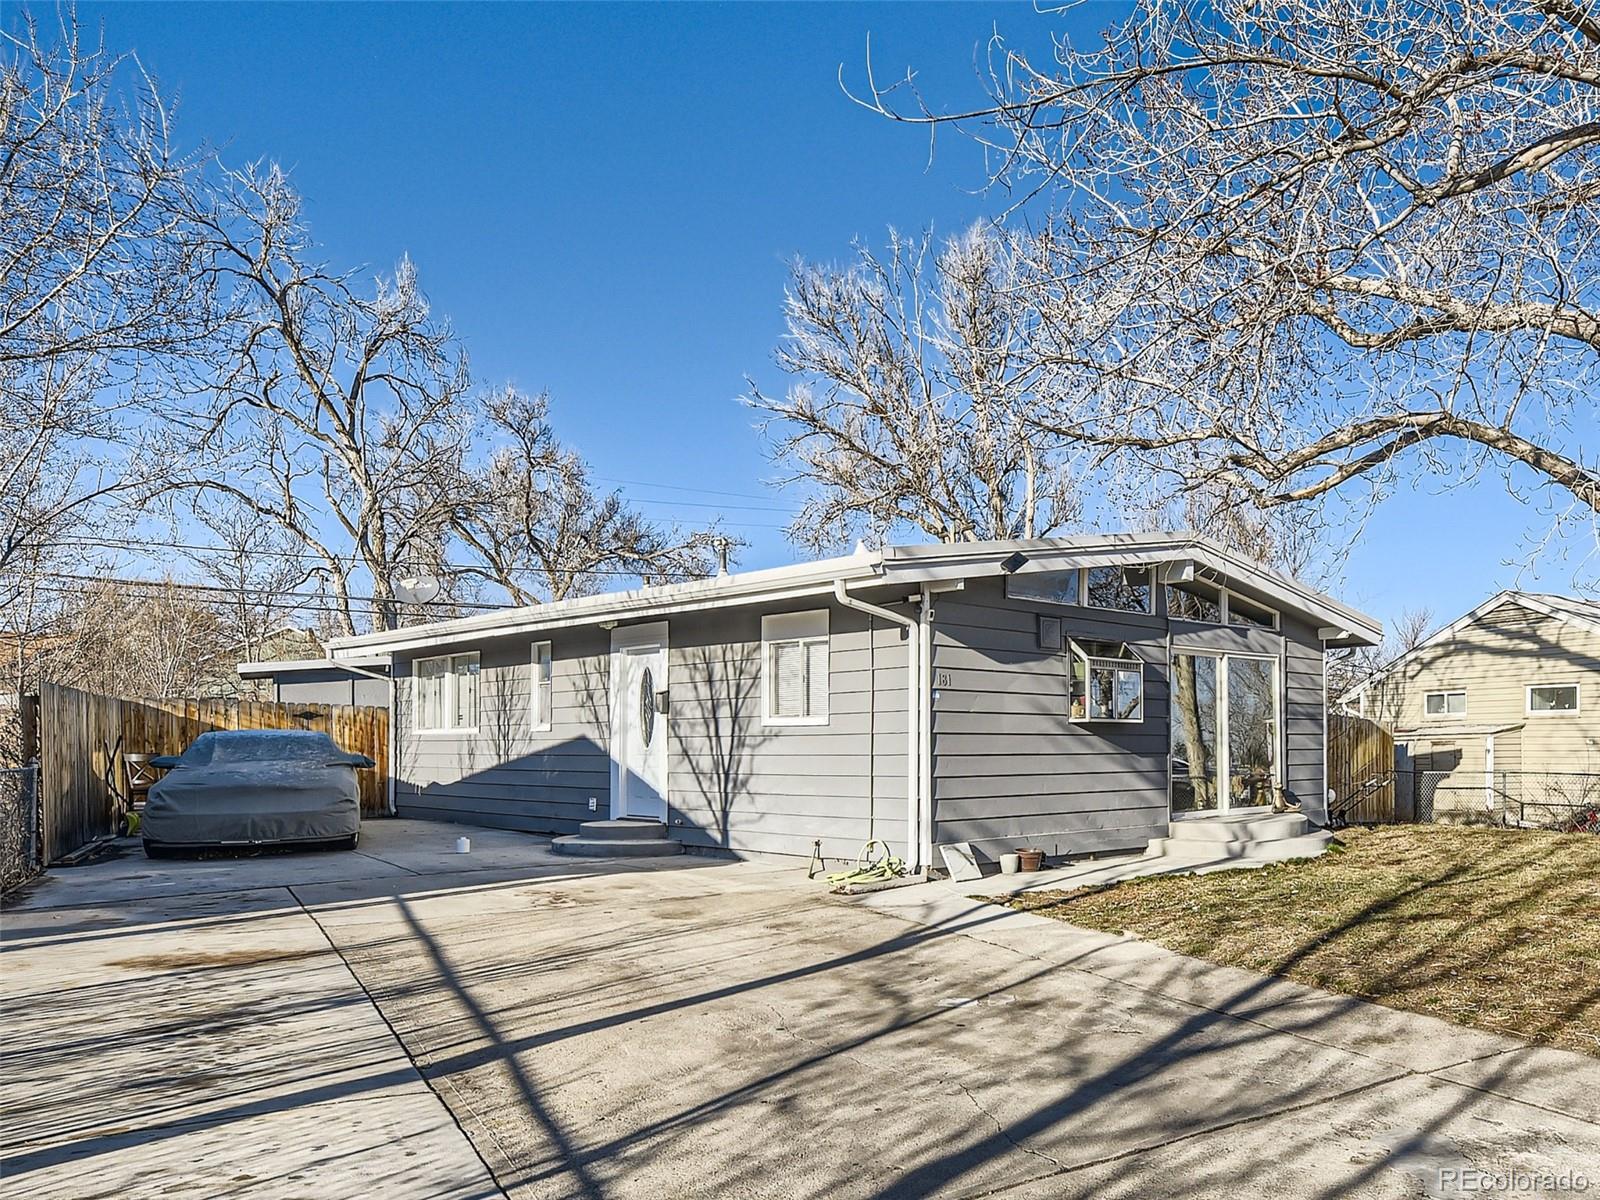 181  cortez street, Denver sold home. Closed on 2024-04-12 for $400,000.